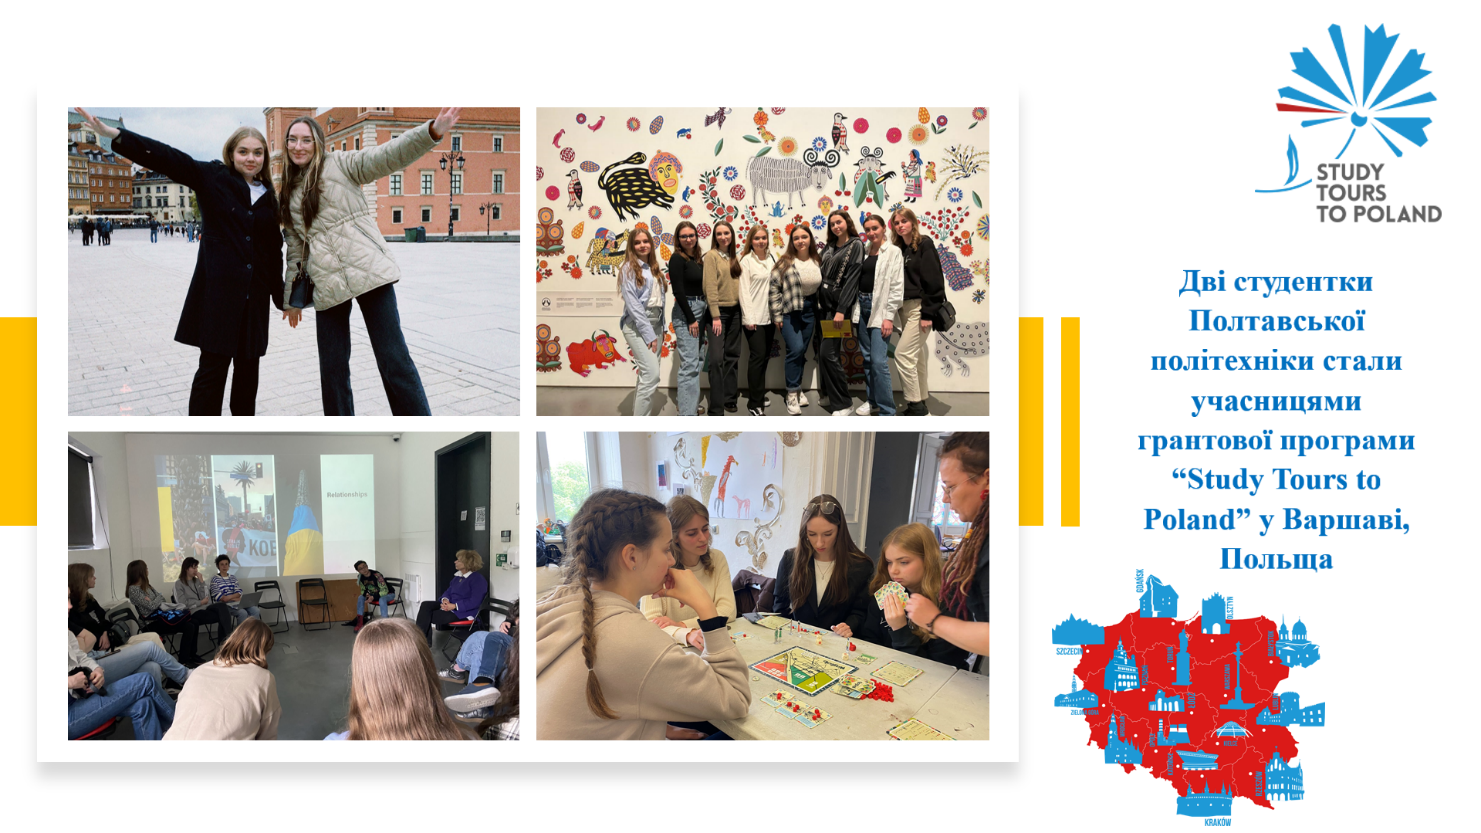 “Study Tours to Poland”: Polytechnic students improve their volunteering skills within the framework of the Polish grant programme